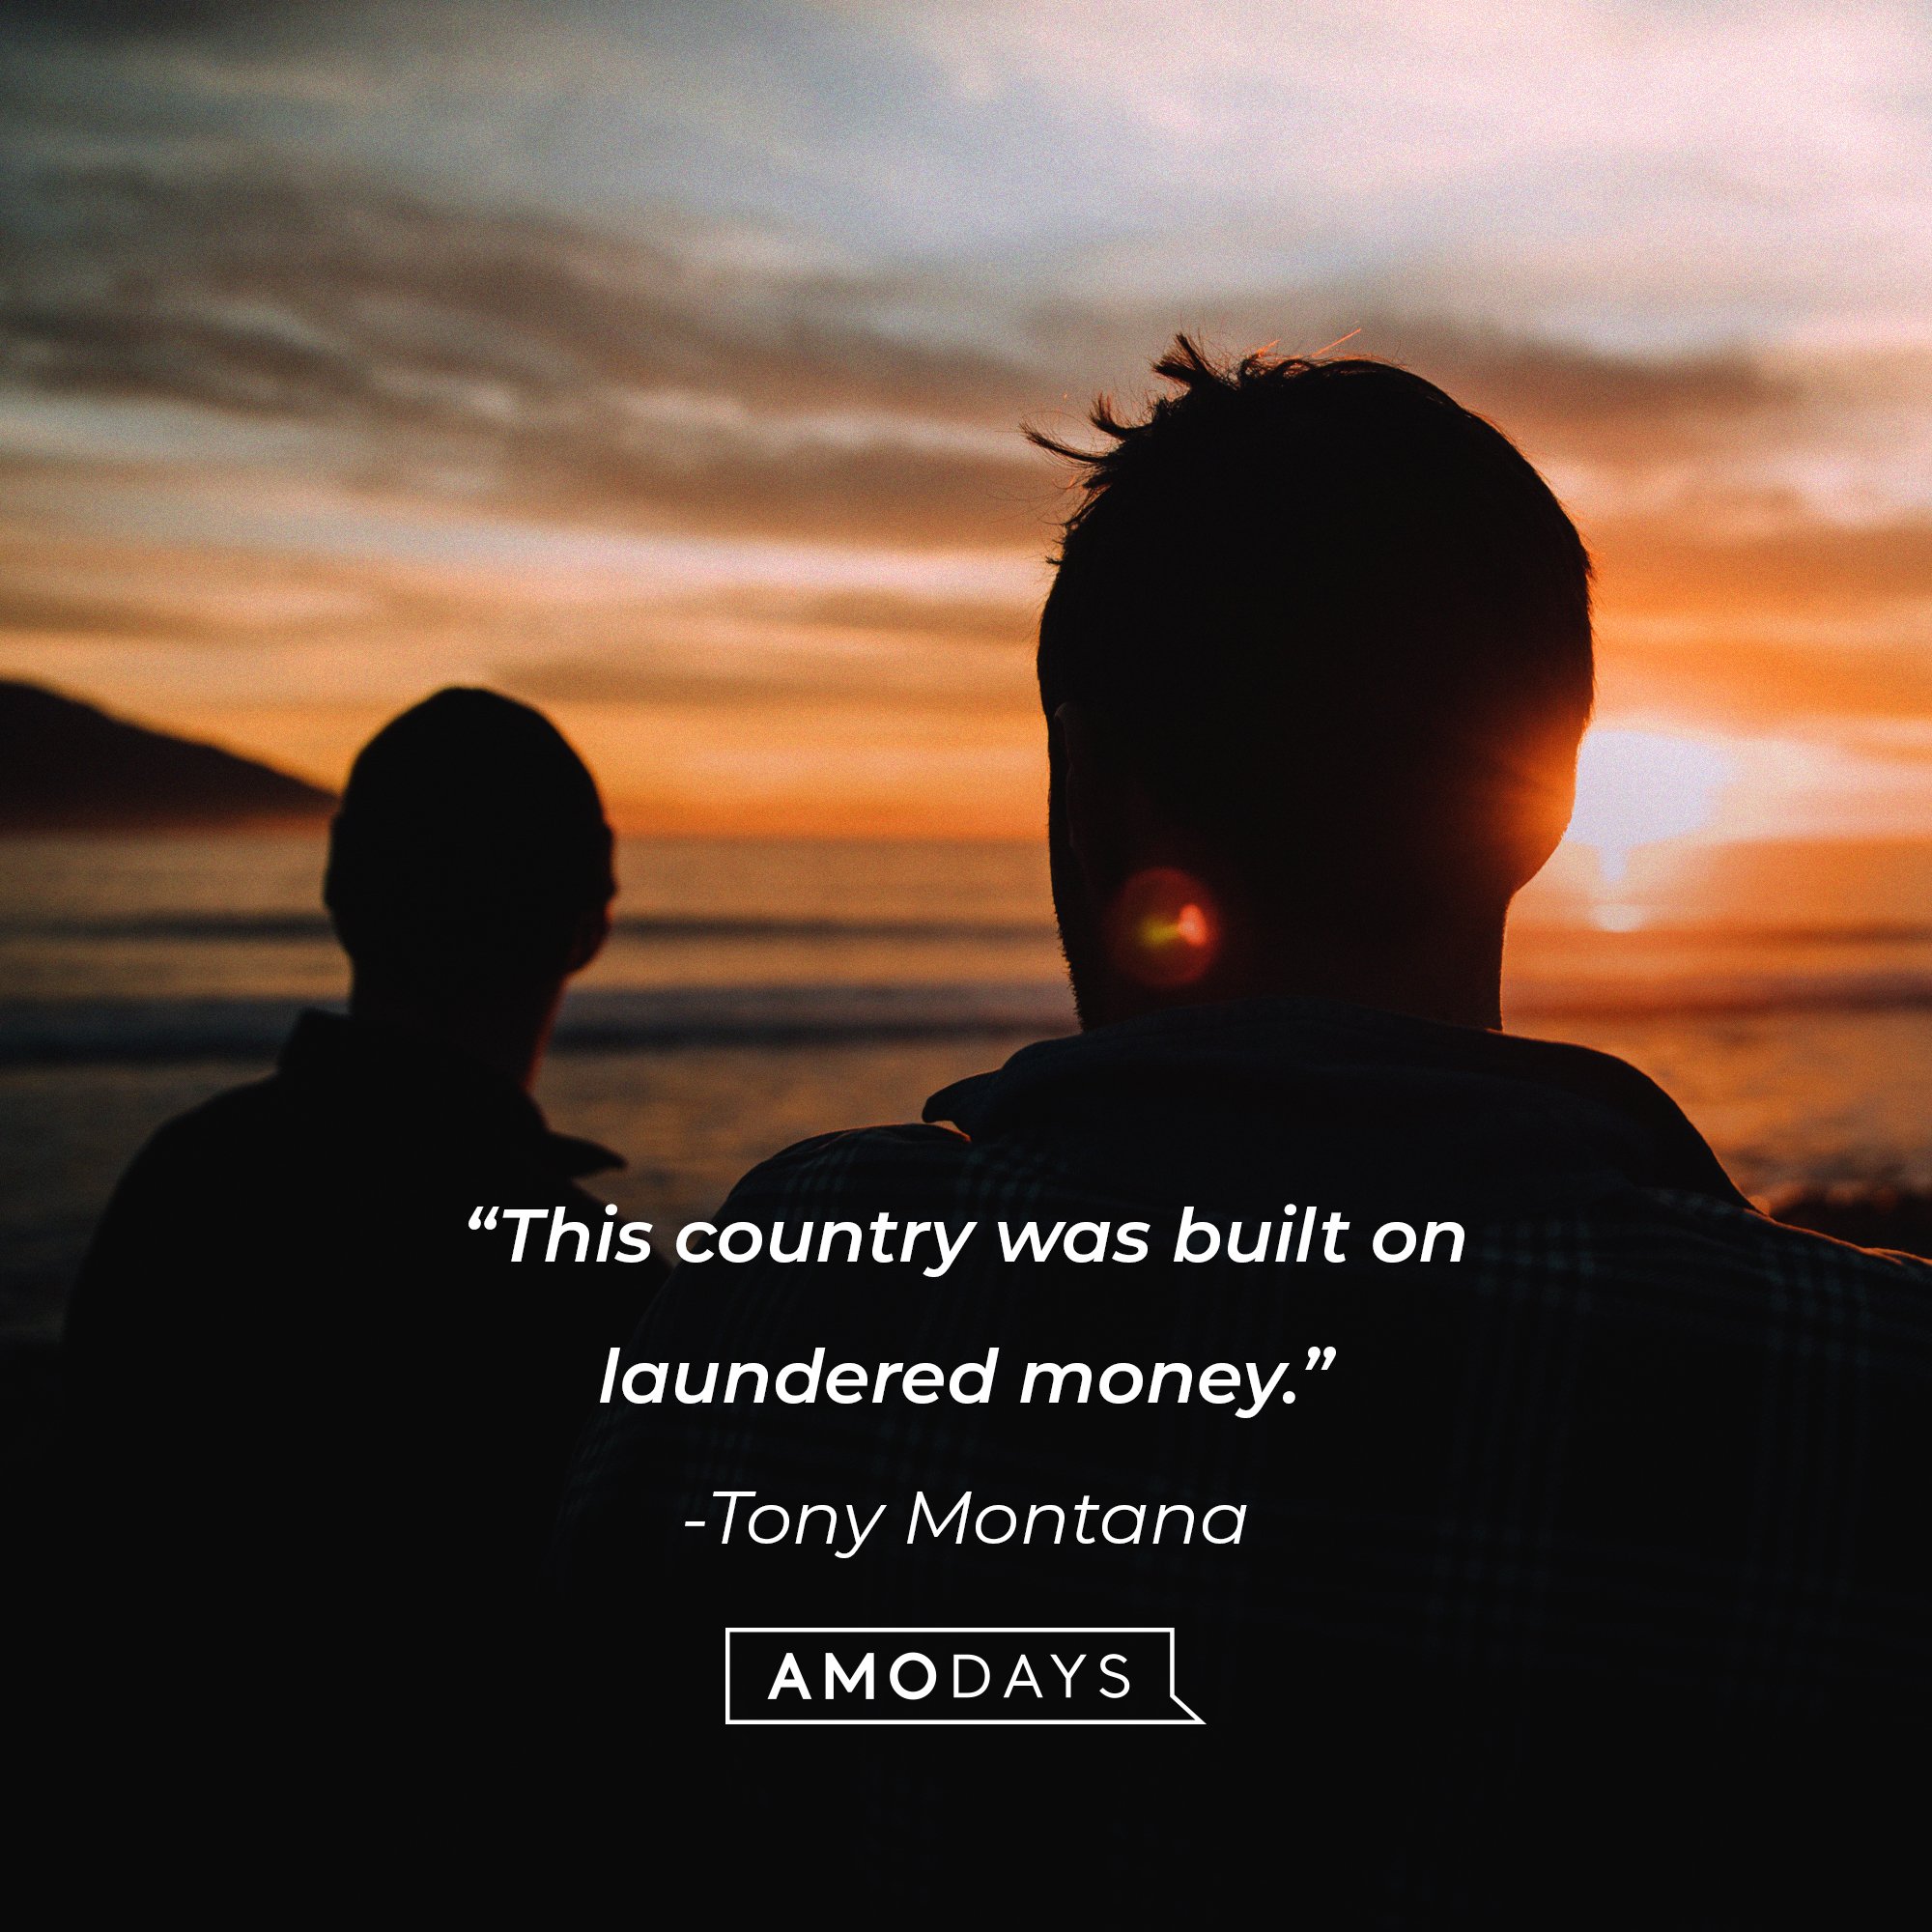 Tony Montana’s quote: “This country was built on laundered money.” | Image: AmoDays